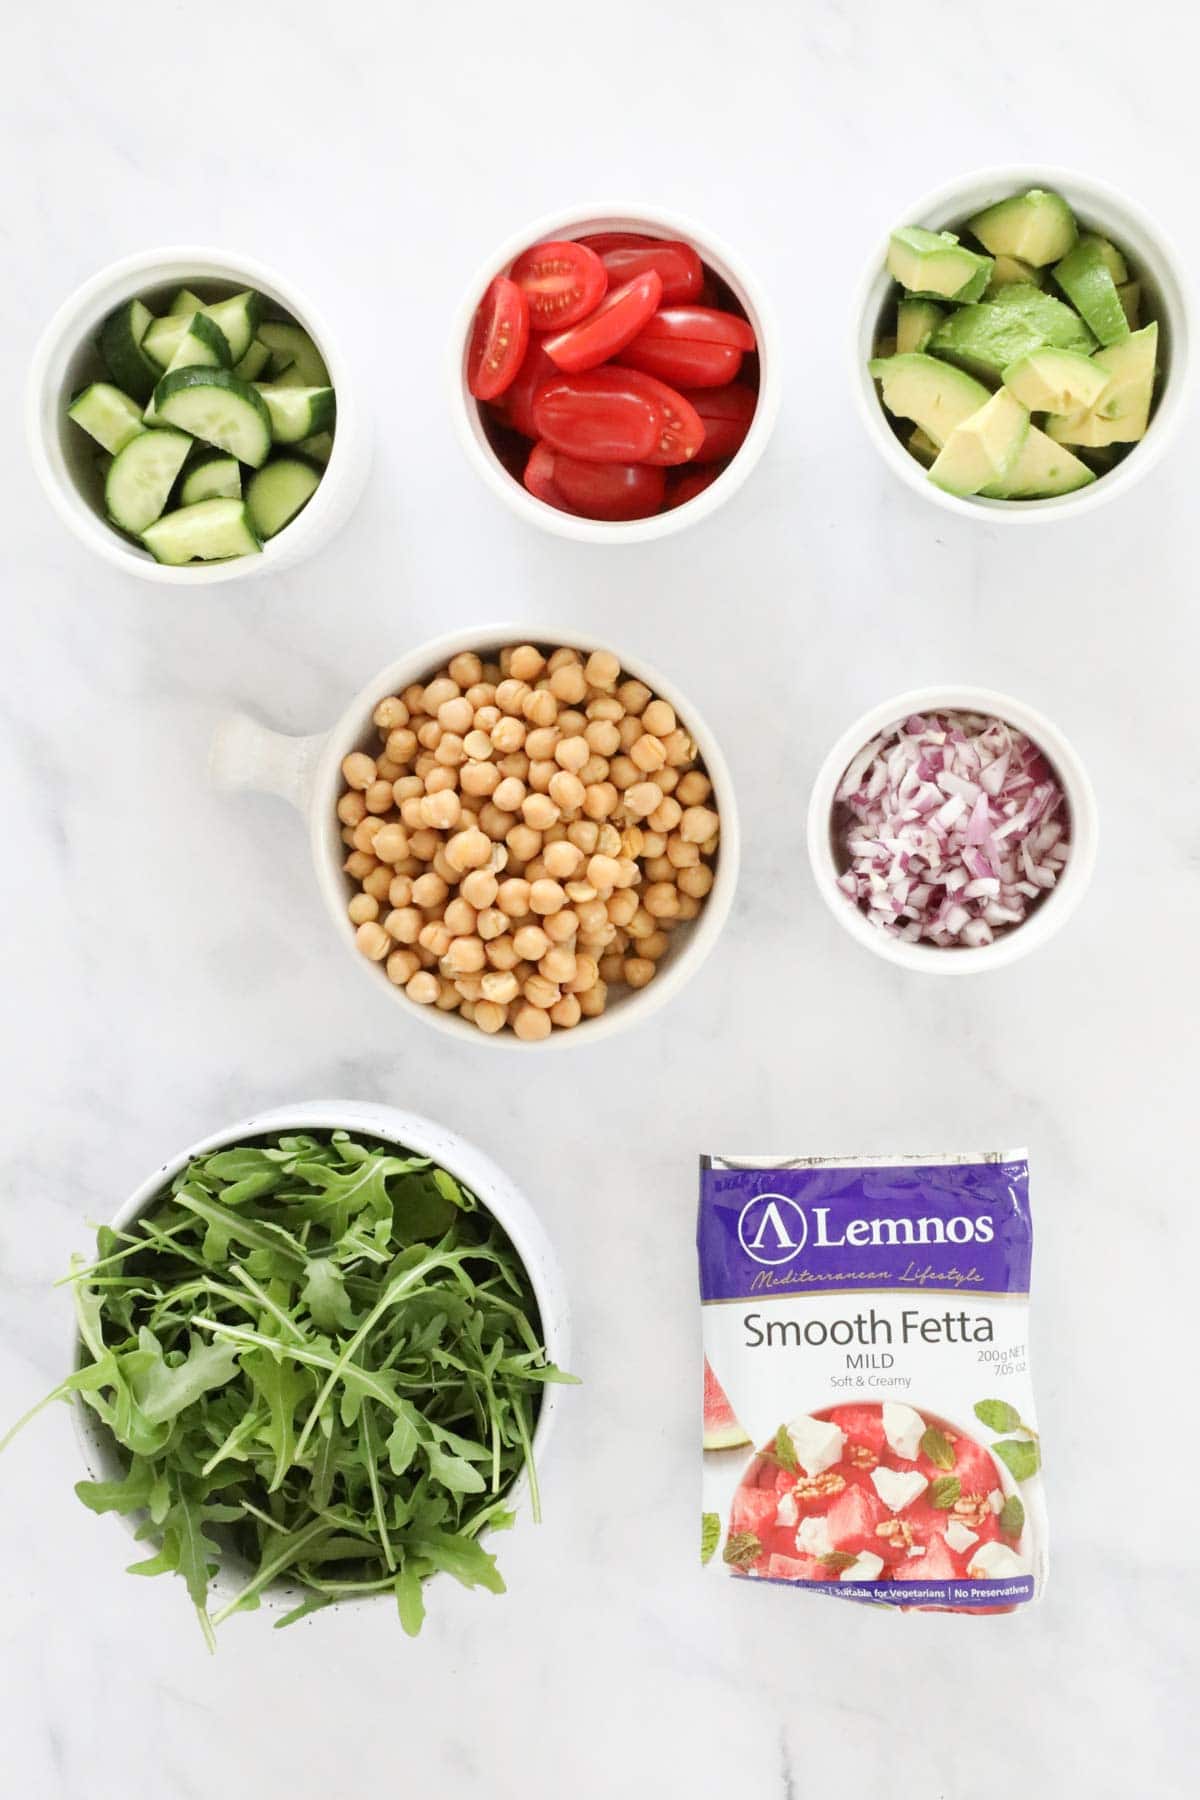 Ingredients needed for the chickpea salad measured out and placed in individual bowls.